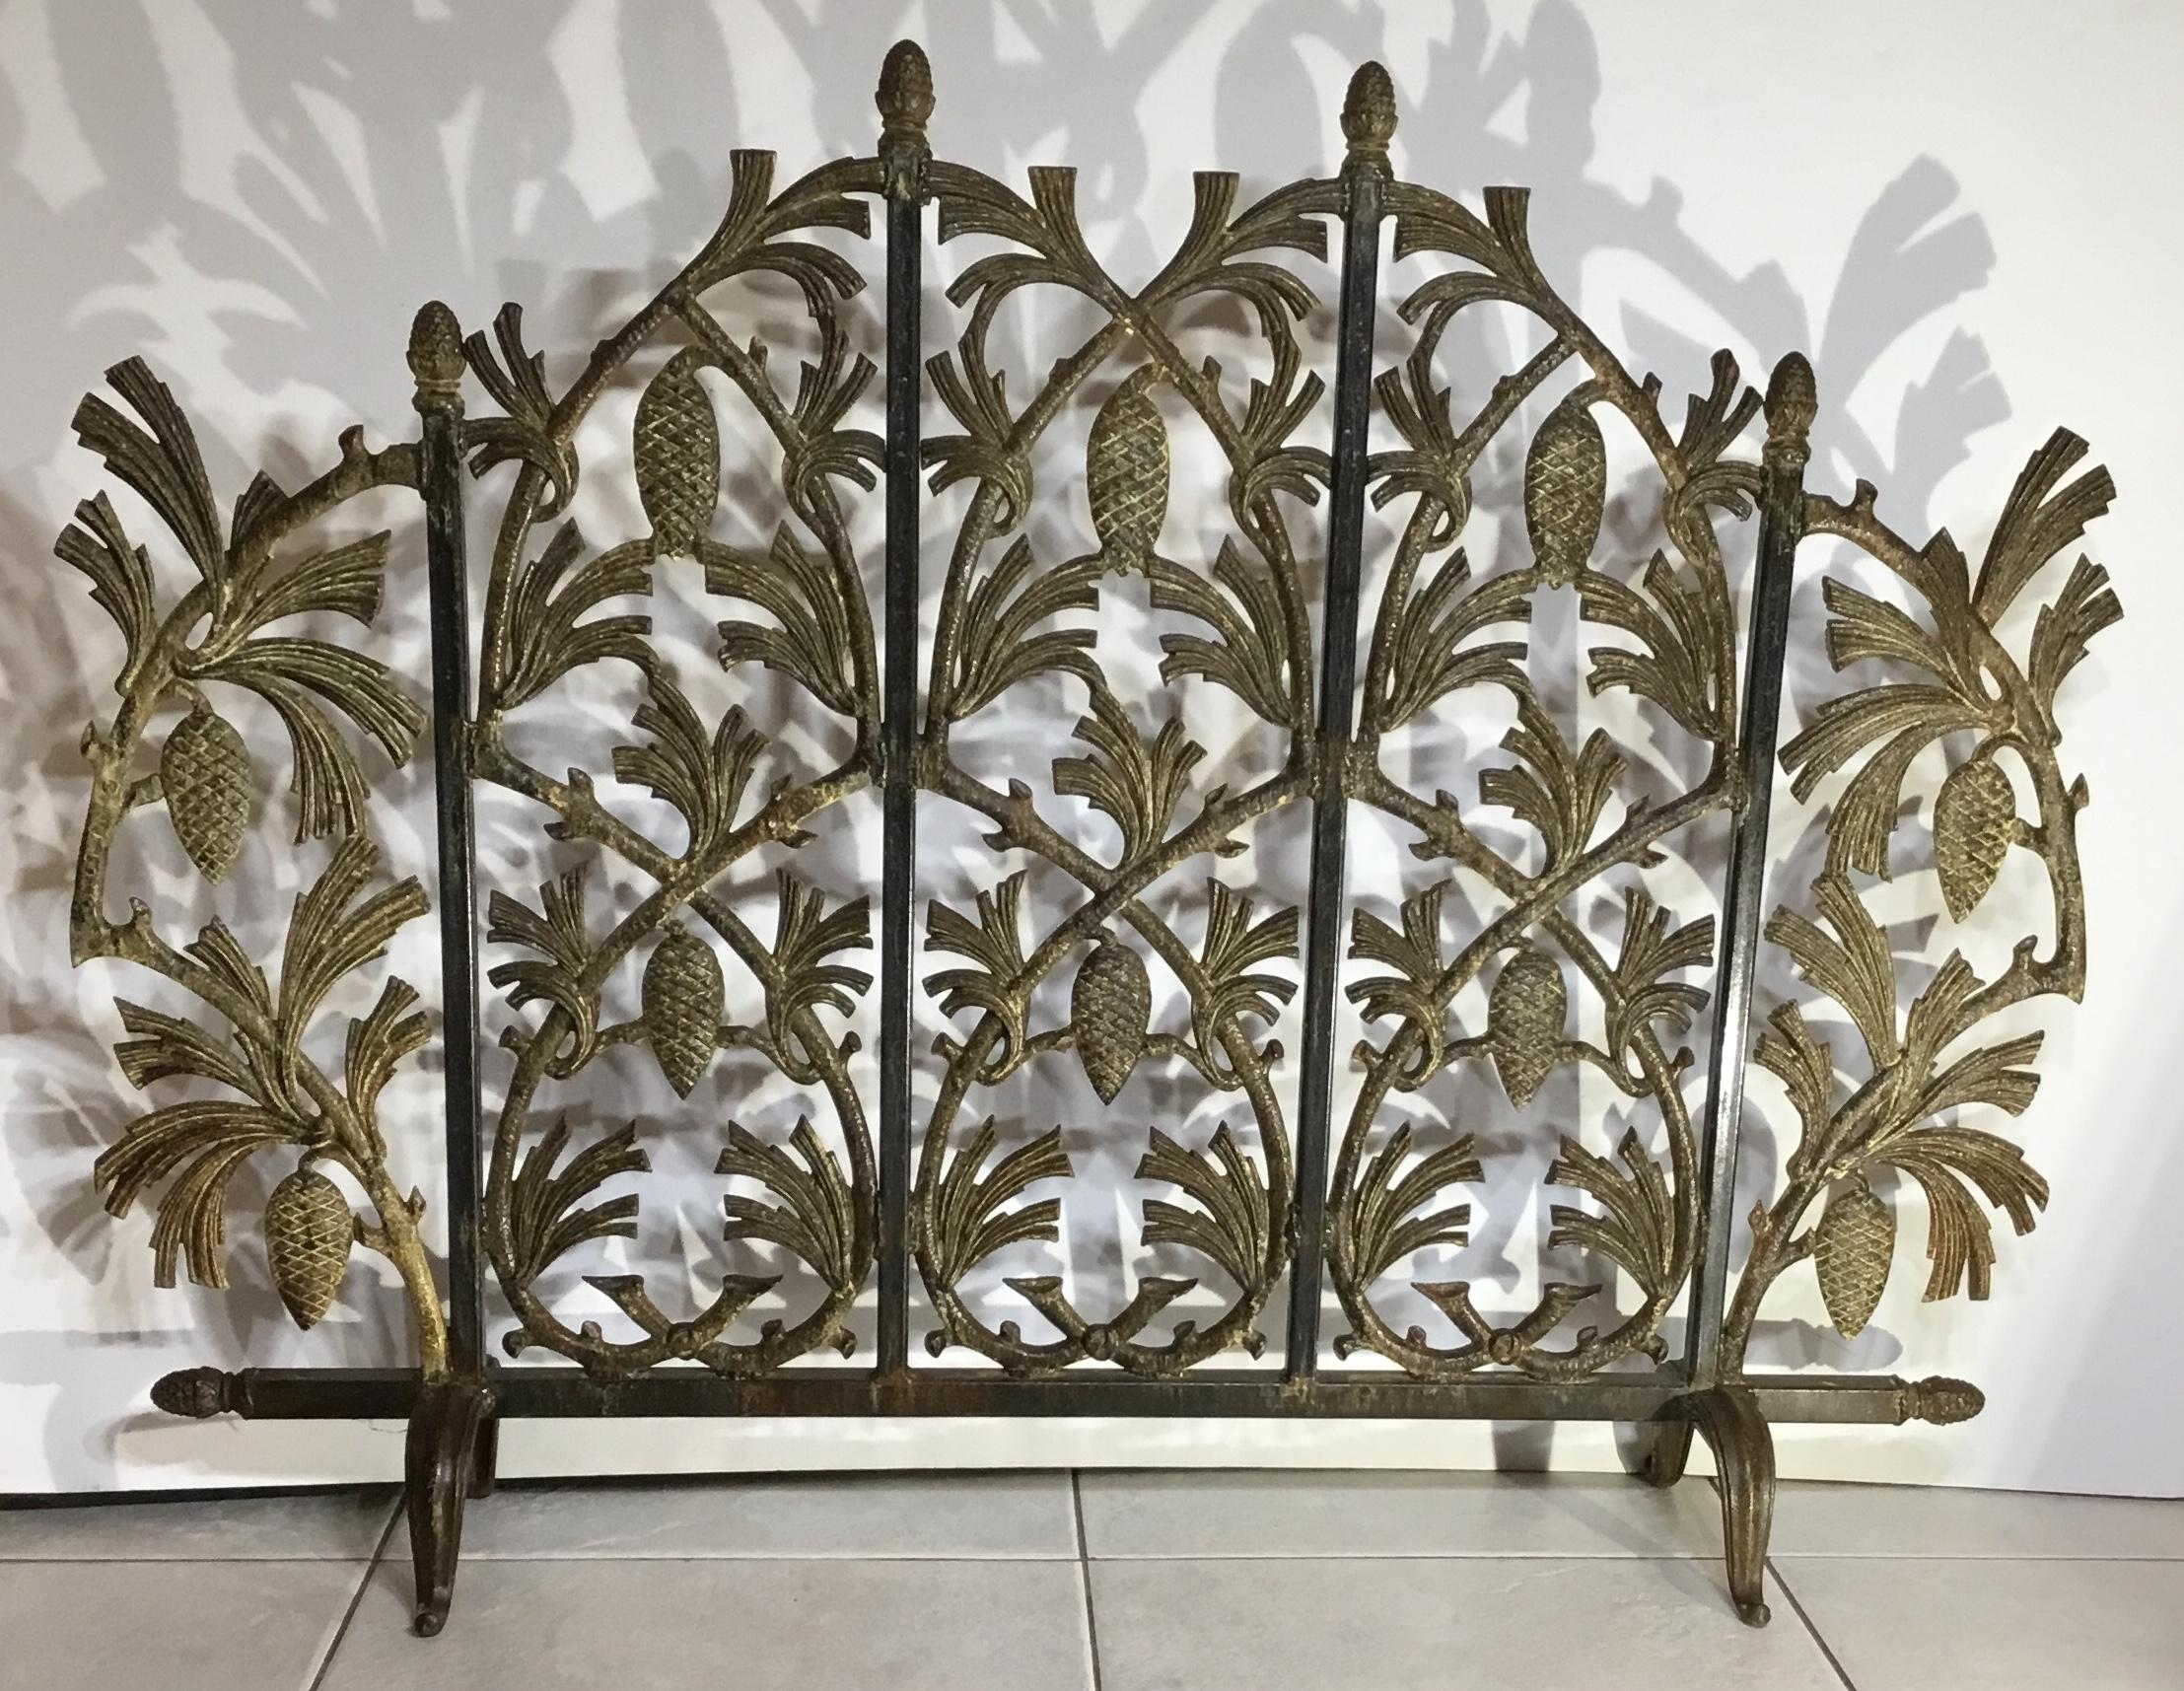 Exceptional fireplace screen made of cast iron with vines and pinecone motifs all around, beautiful patina, treated for rust, great decorative object of art for the fireplace.